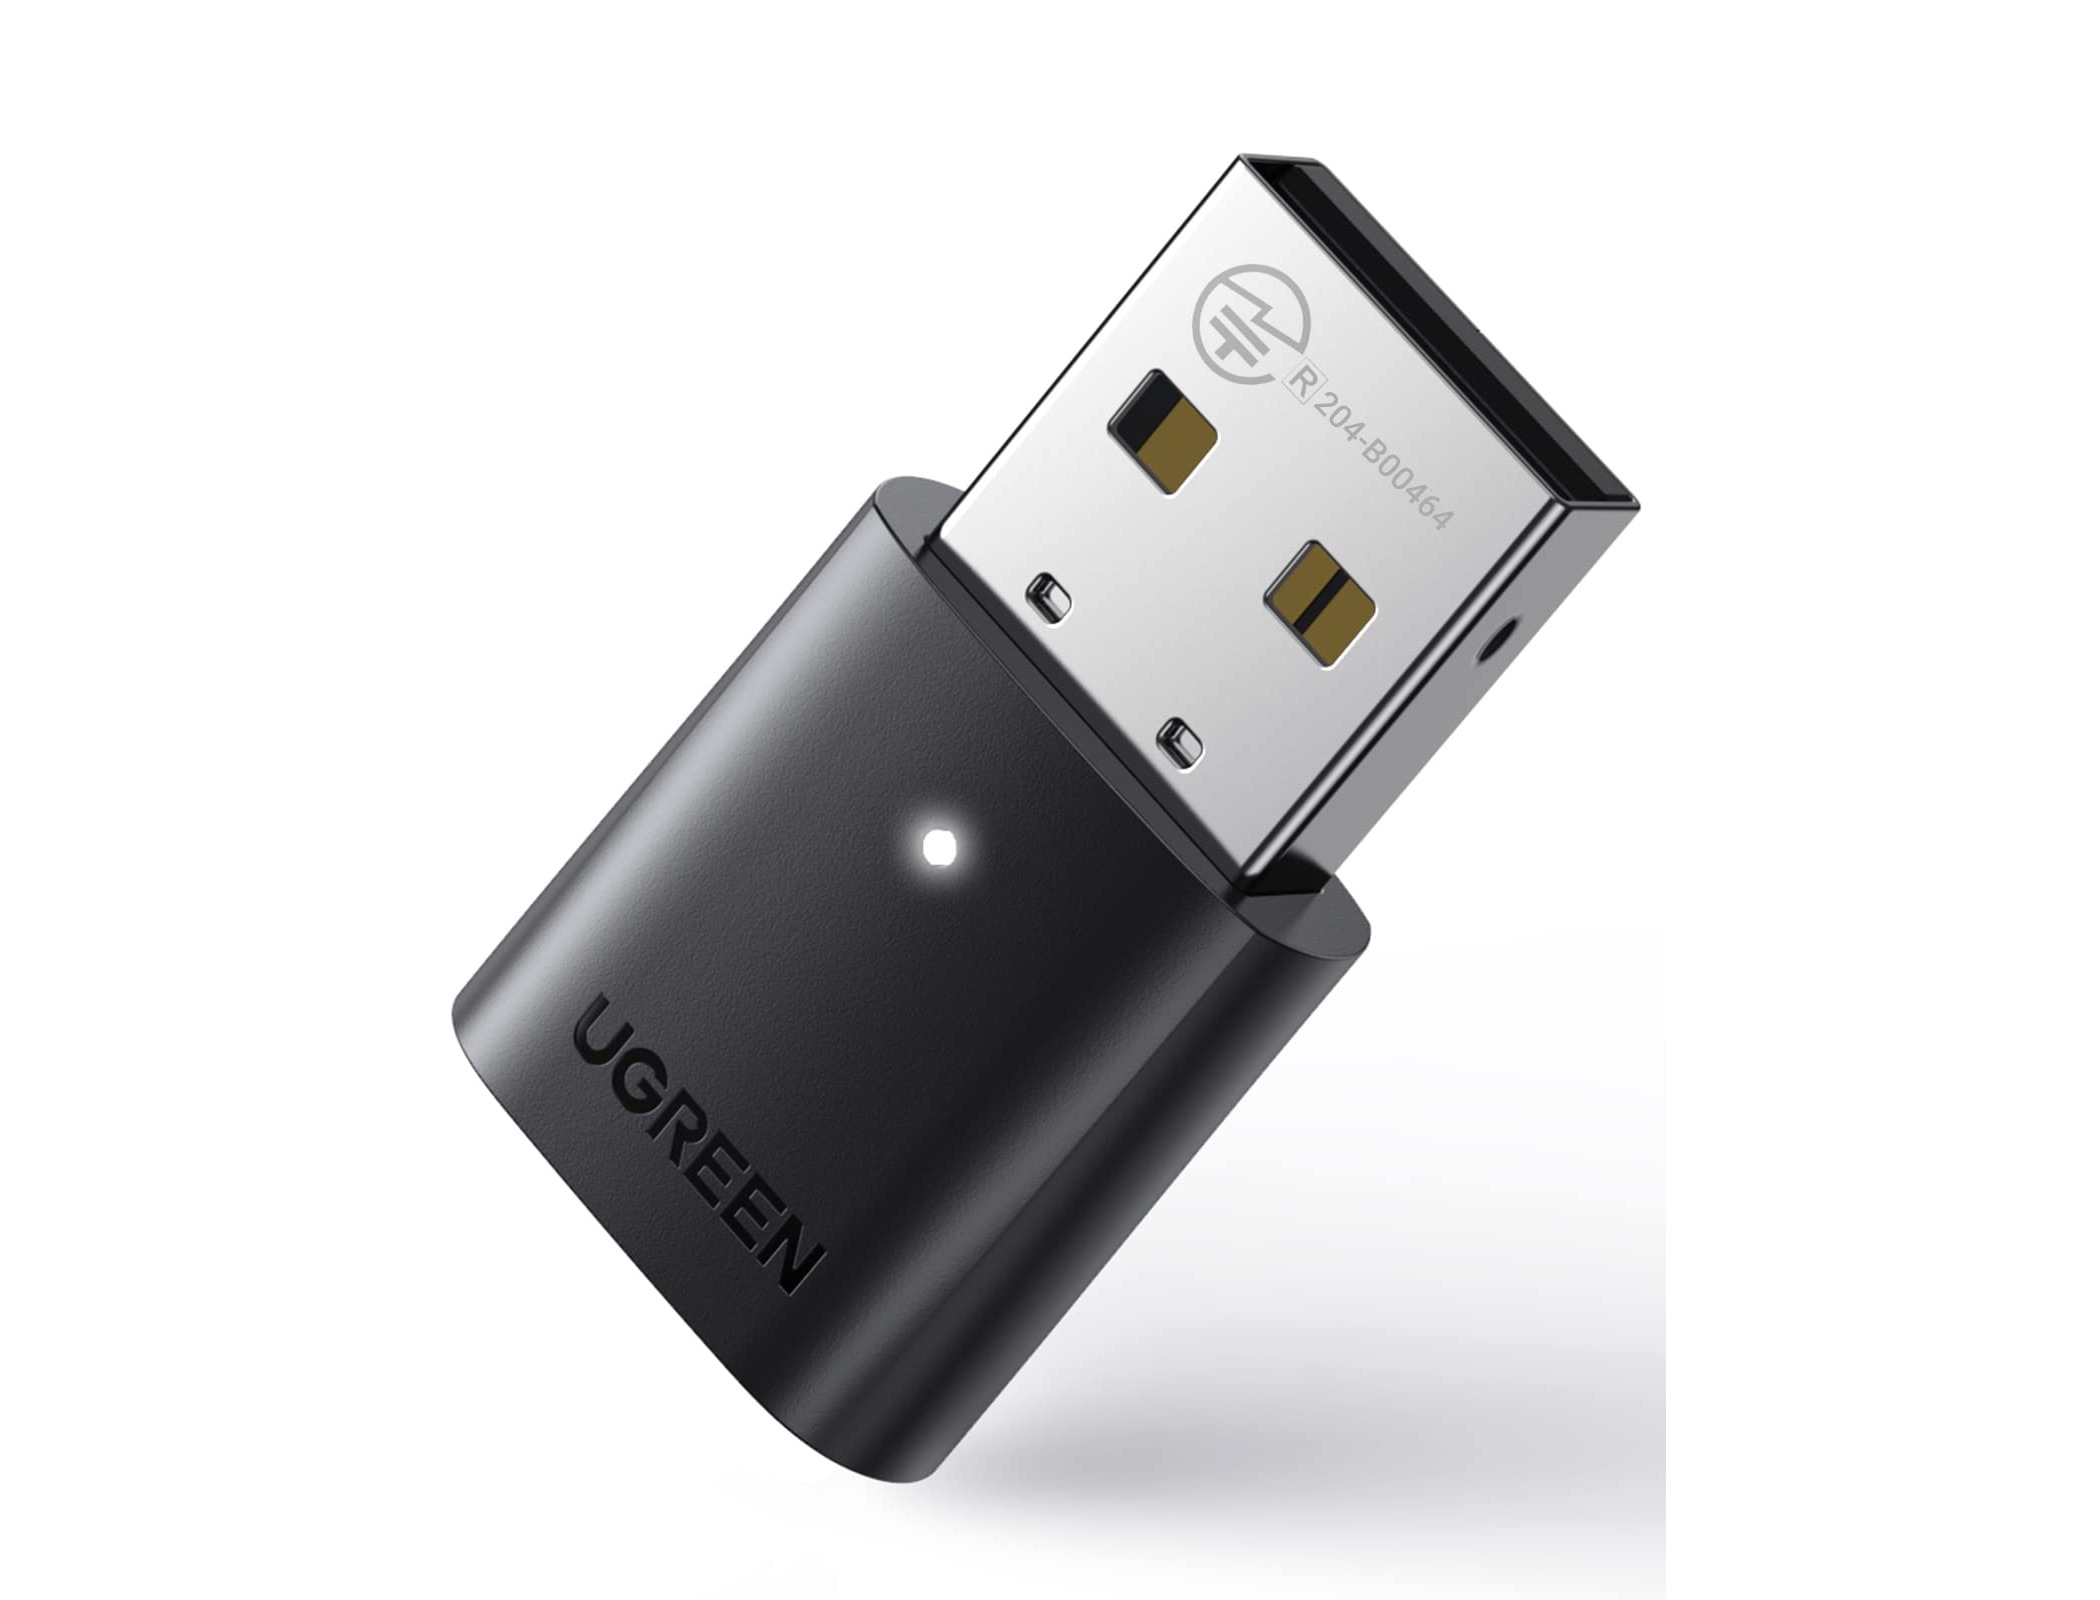 Troubleshooting: How To Reset Your USB Bluetooth Dongle